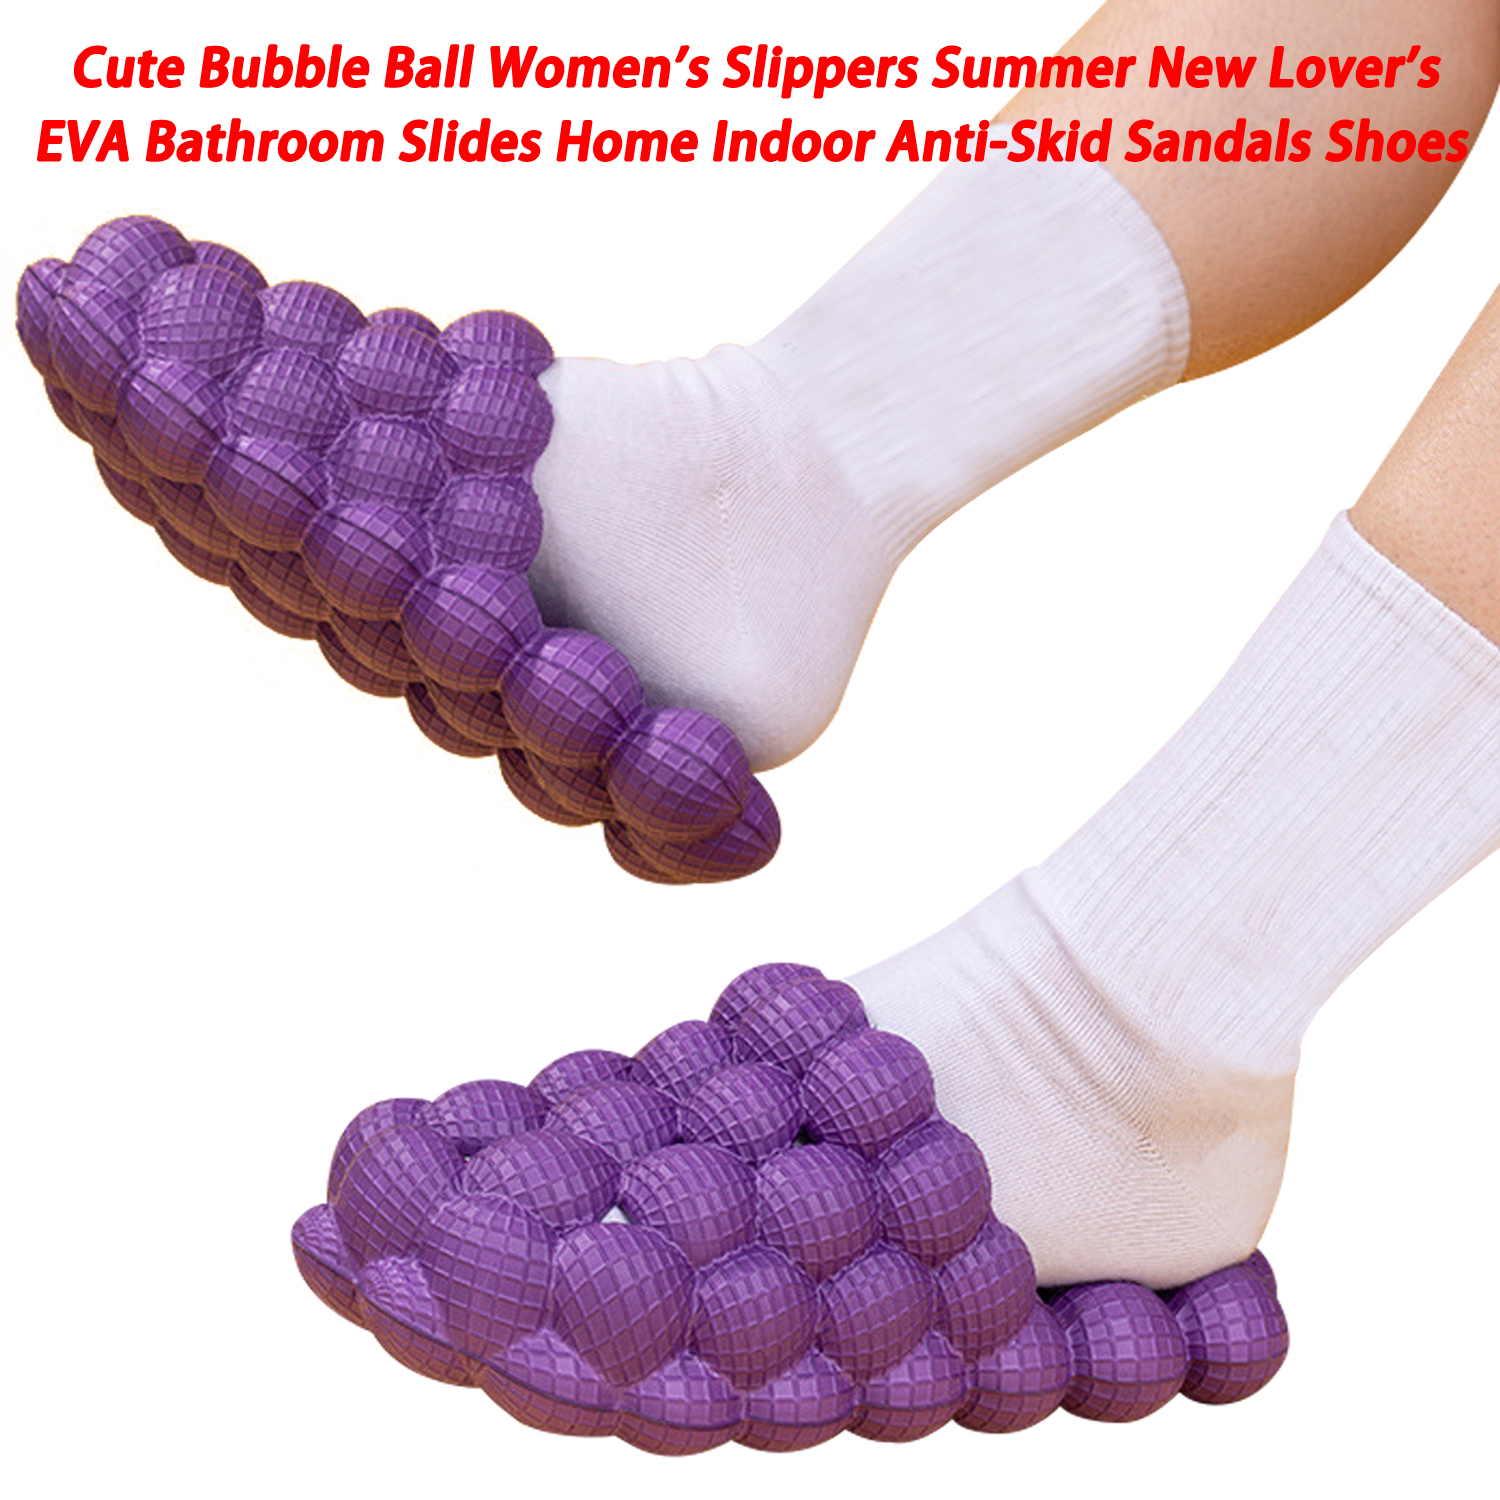 Cute Bubble Ball Women's Slippers Summer New Lover's EVA Bathroom Slides Home Indoor Anti-Skid Sandals Shoes